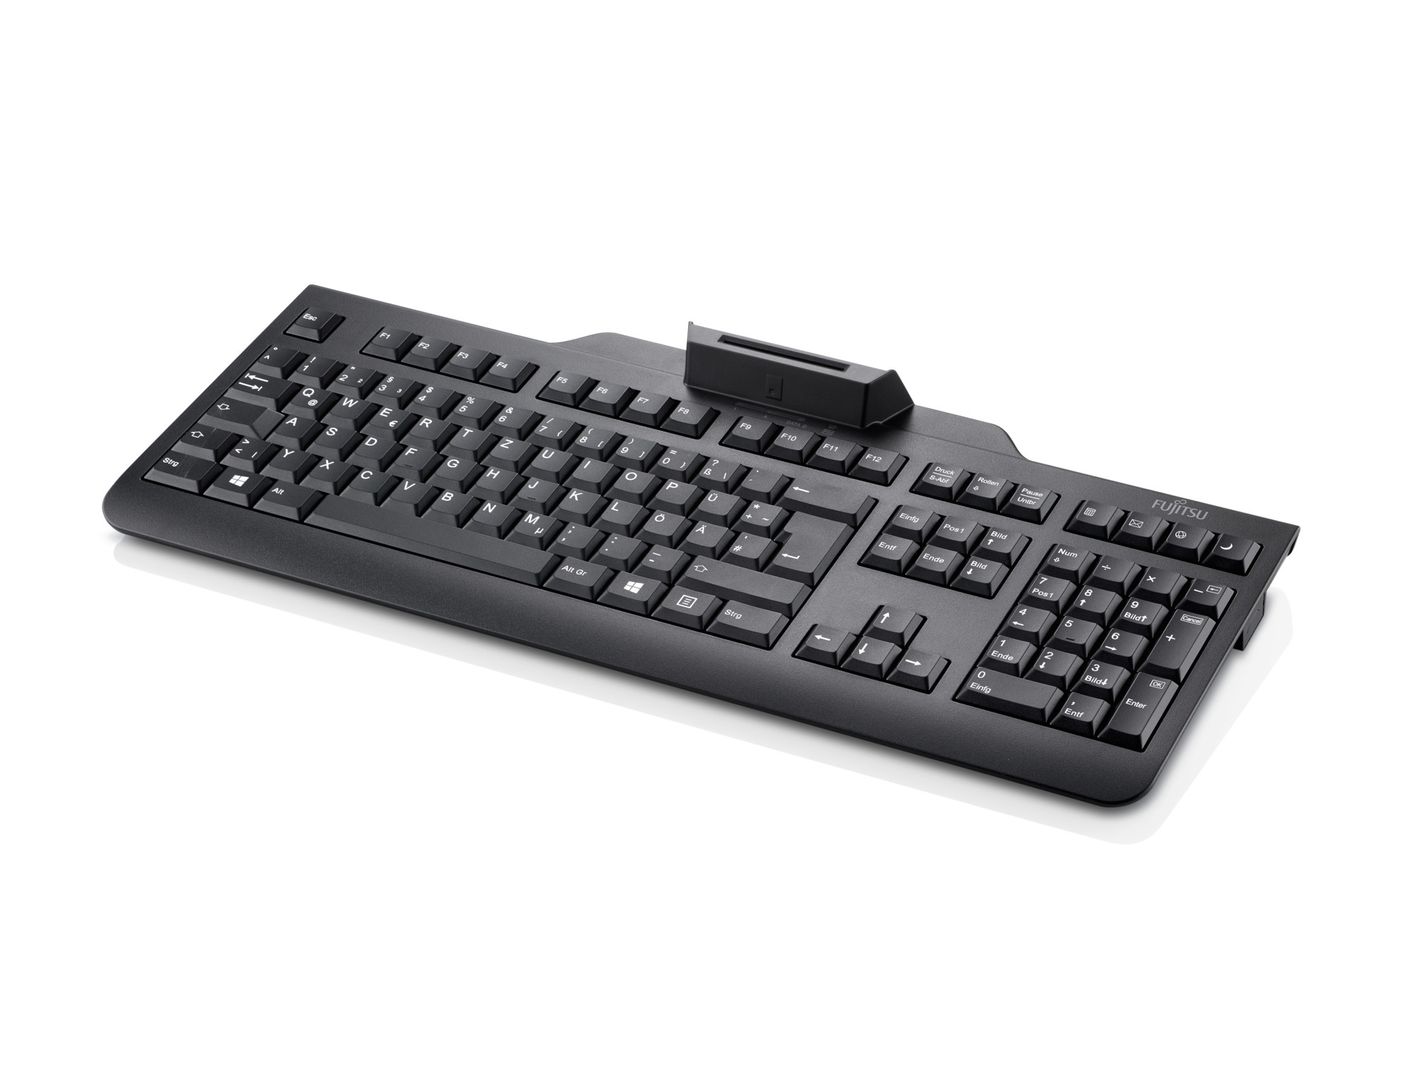 ambitie opvoeder de ober FUJITSU SmartCard keyboard black USA with class 2 reader on the top USB  cable 1.8m manual driver DVD USB 2.0 105 keys | Synigo